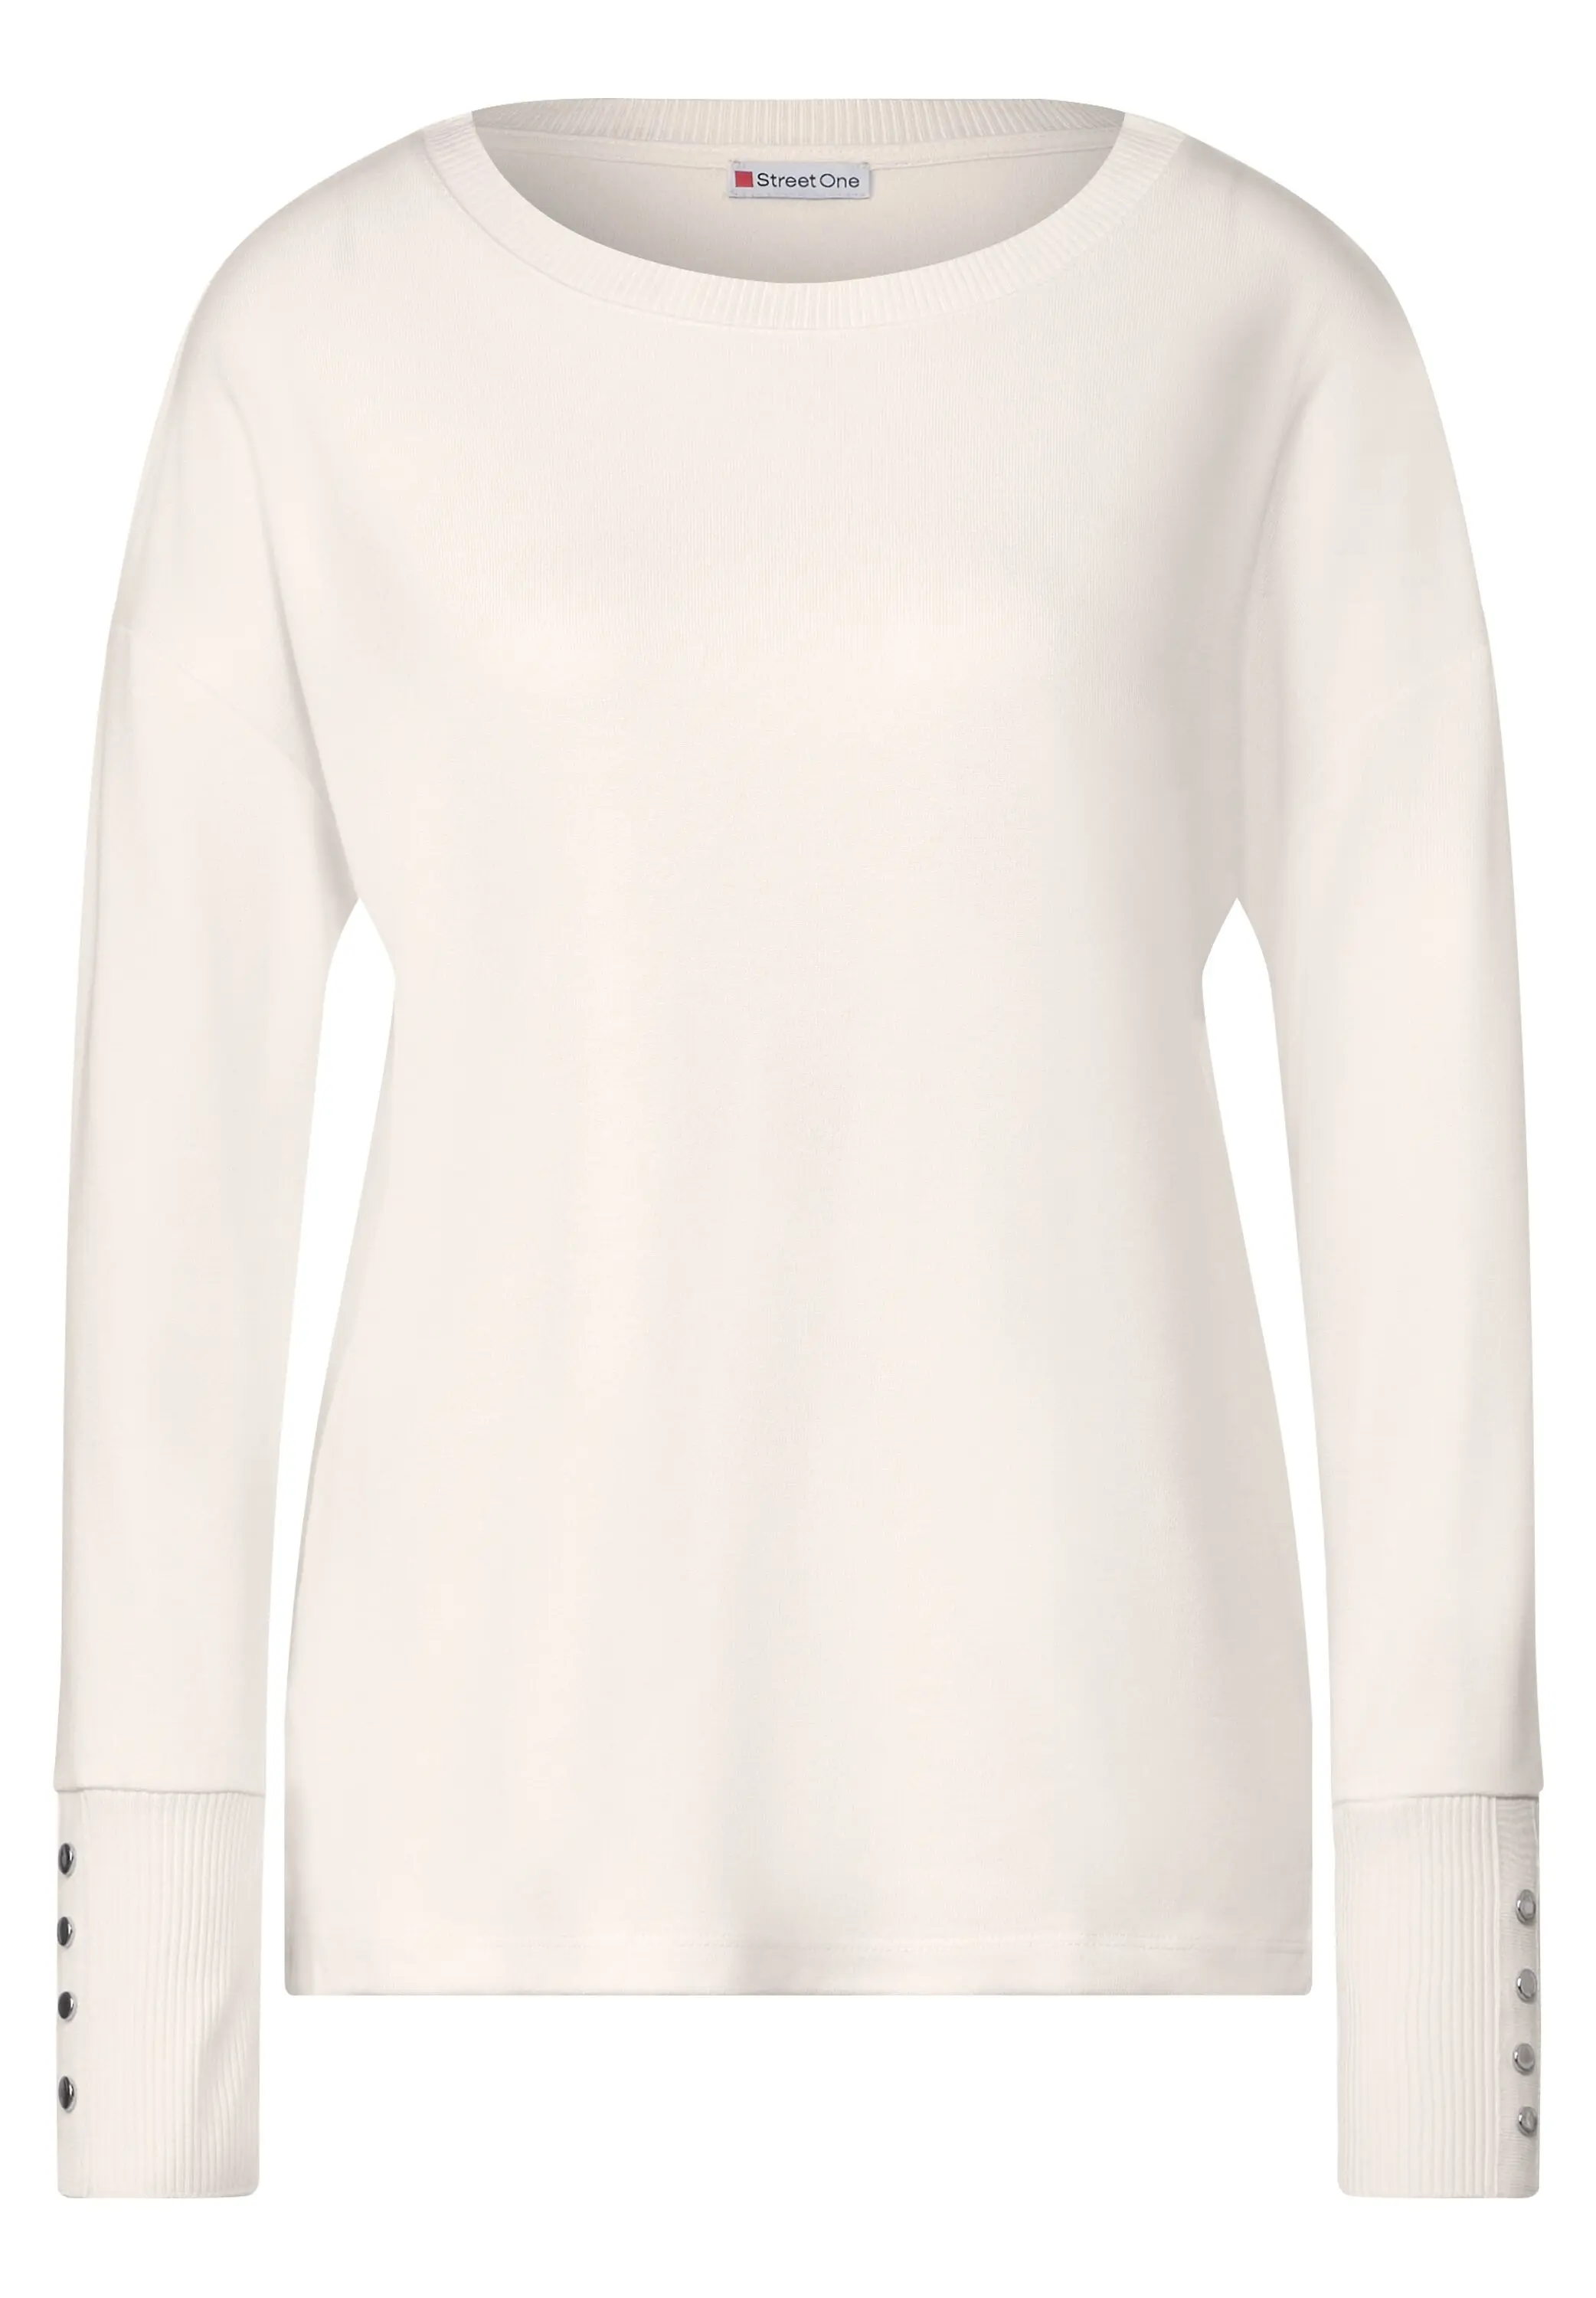 Street One Shirt 34 Knopfdetail white mit | | lucid